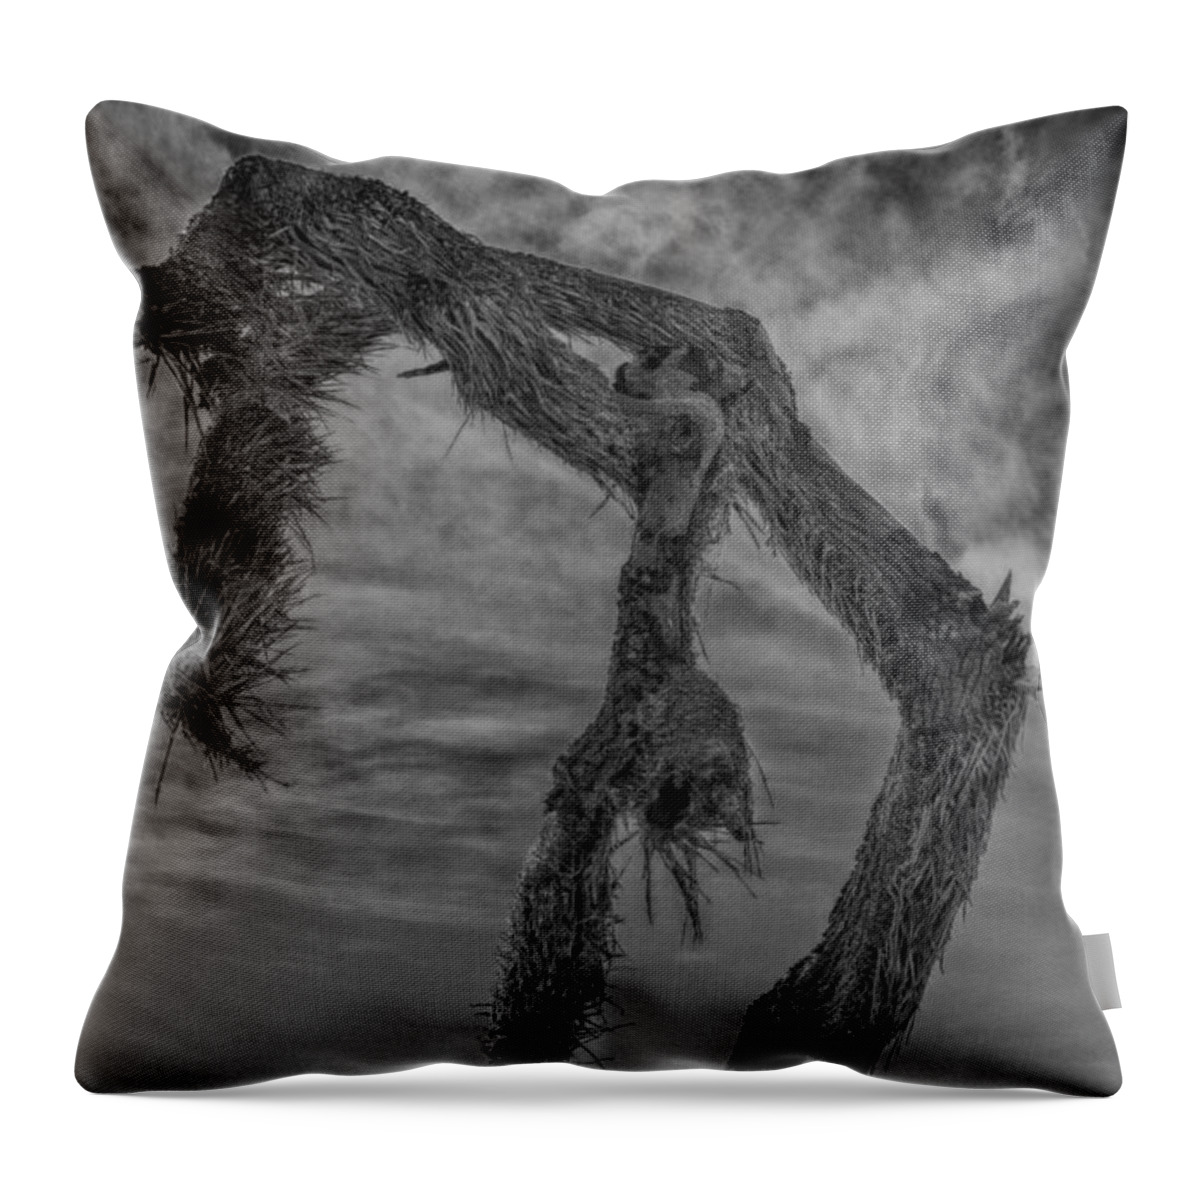 Joshua Tree Throw Pillow featuring the photograph Broken Back by Sandra Selle Rodriguez